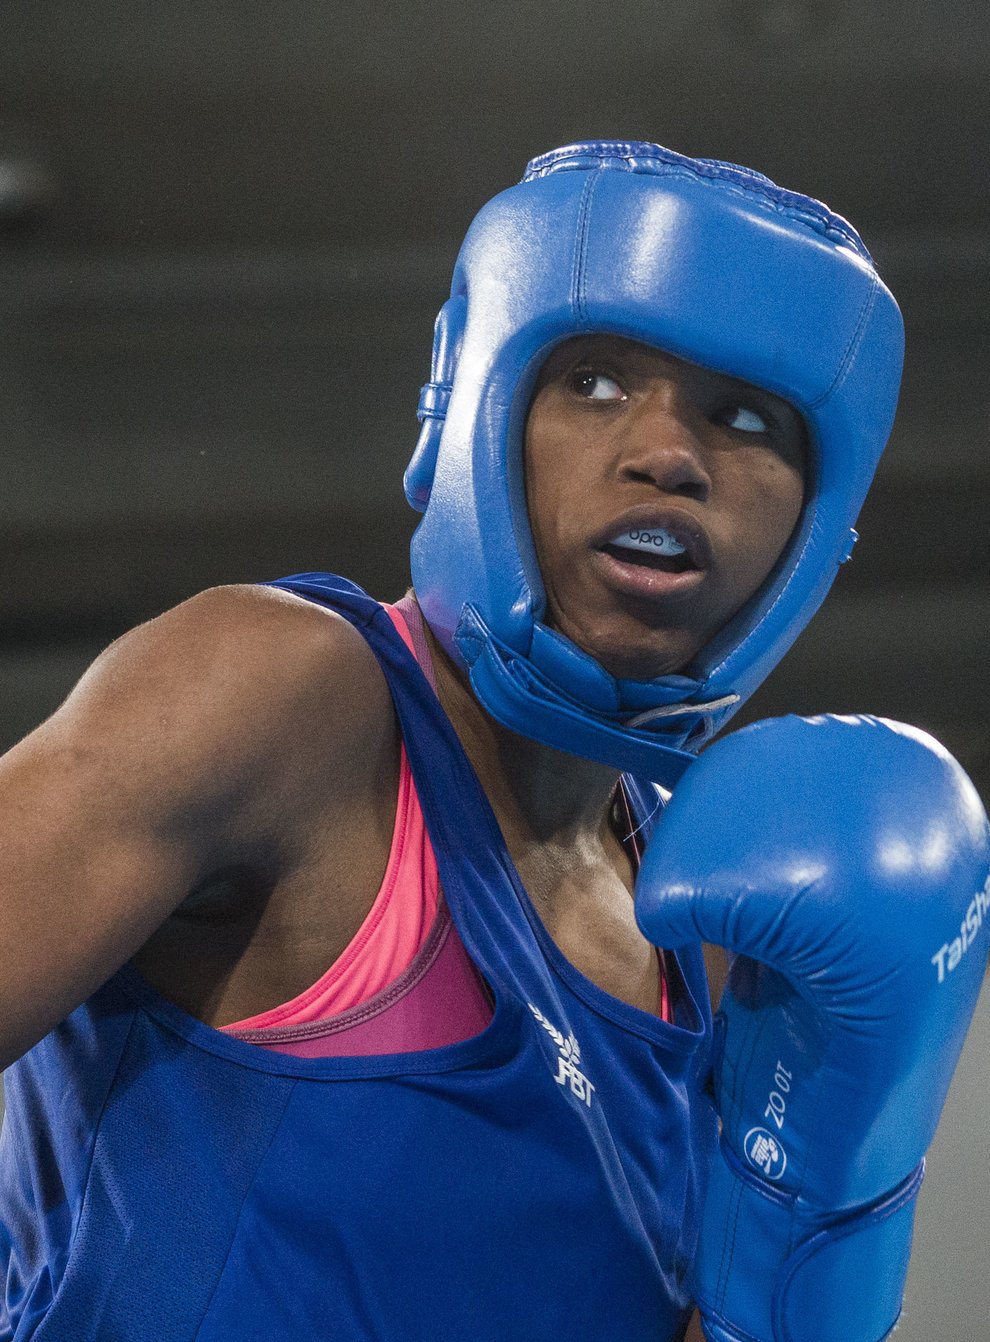 Dubois has made a name for herself in an exceptionally short period of time as an amateur (PA Images)